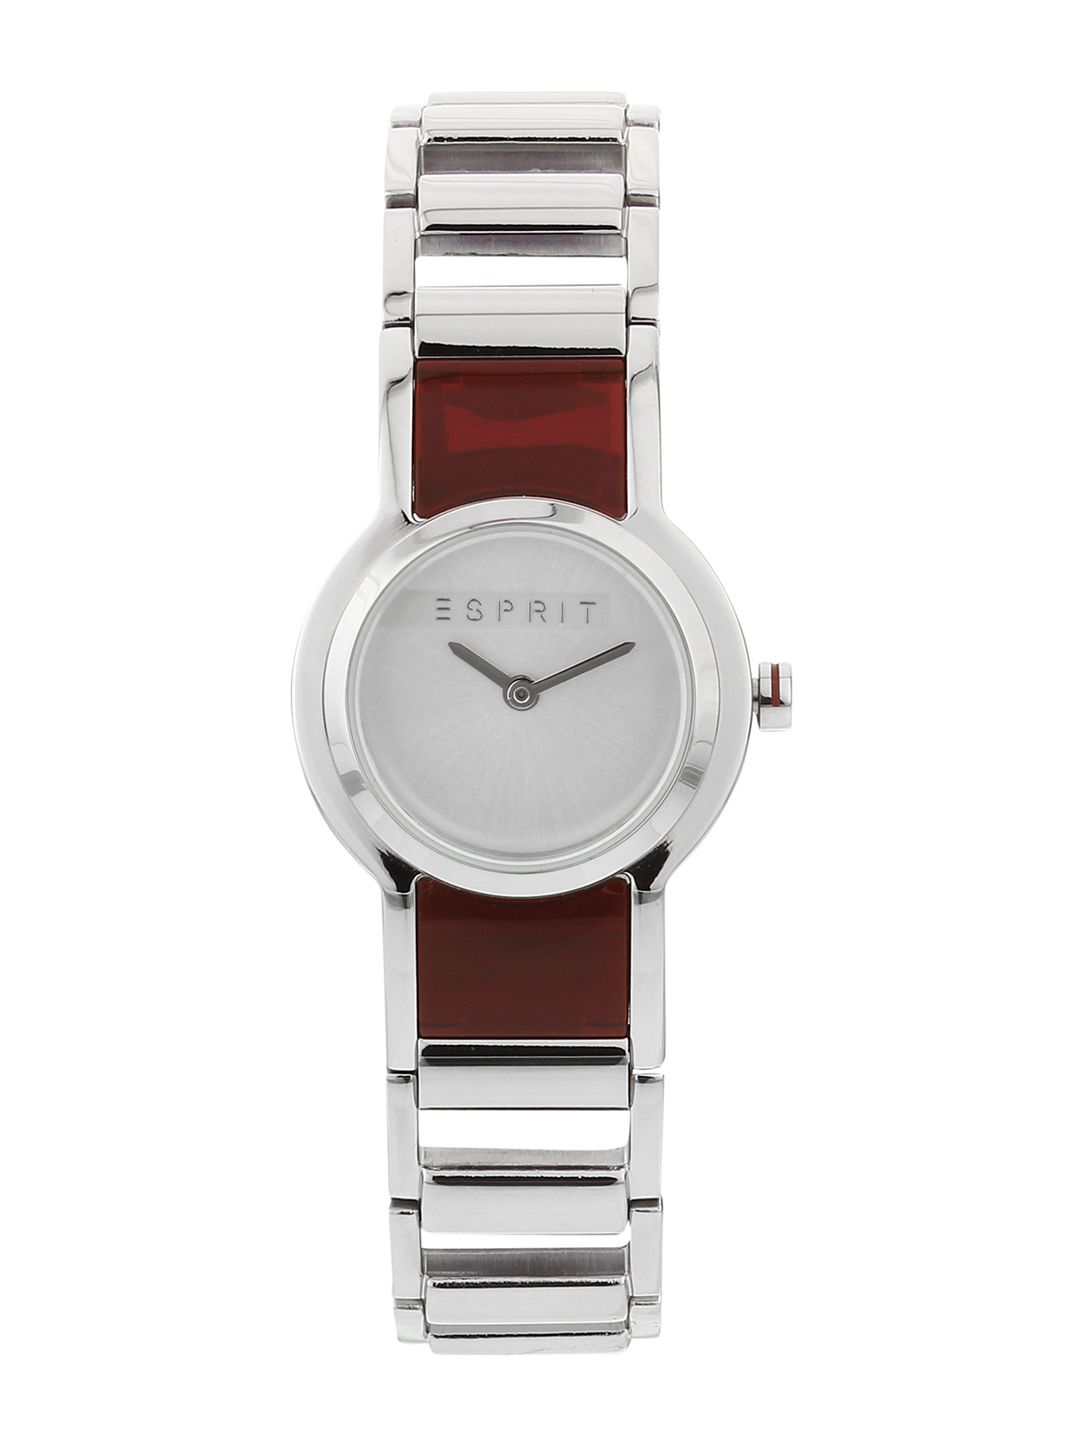 ESPRIT Women Silver-Toned Analogue Watch ES1L084M0055 Price in India